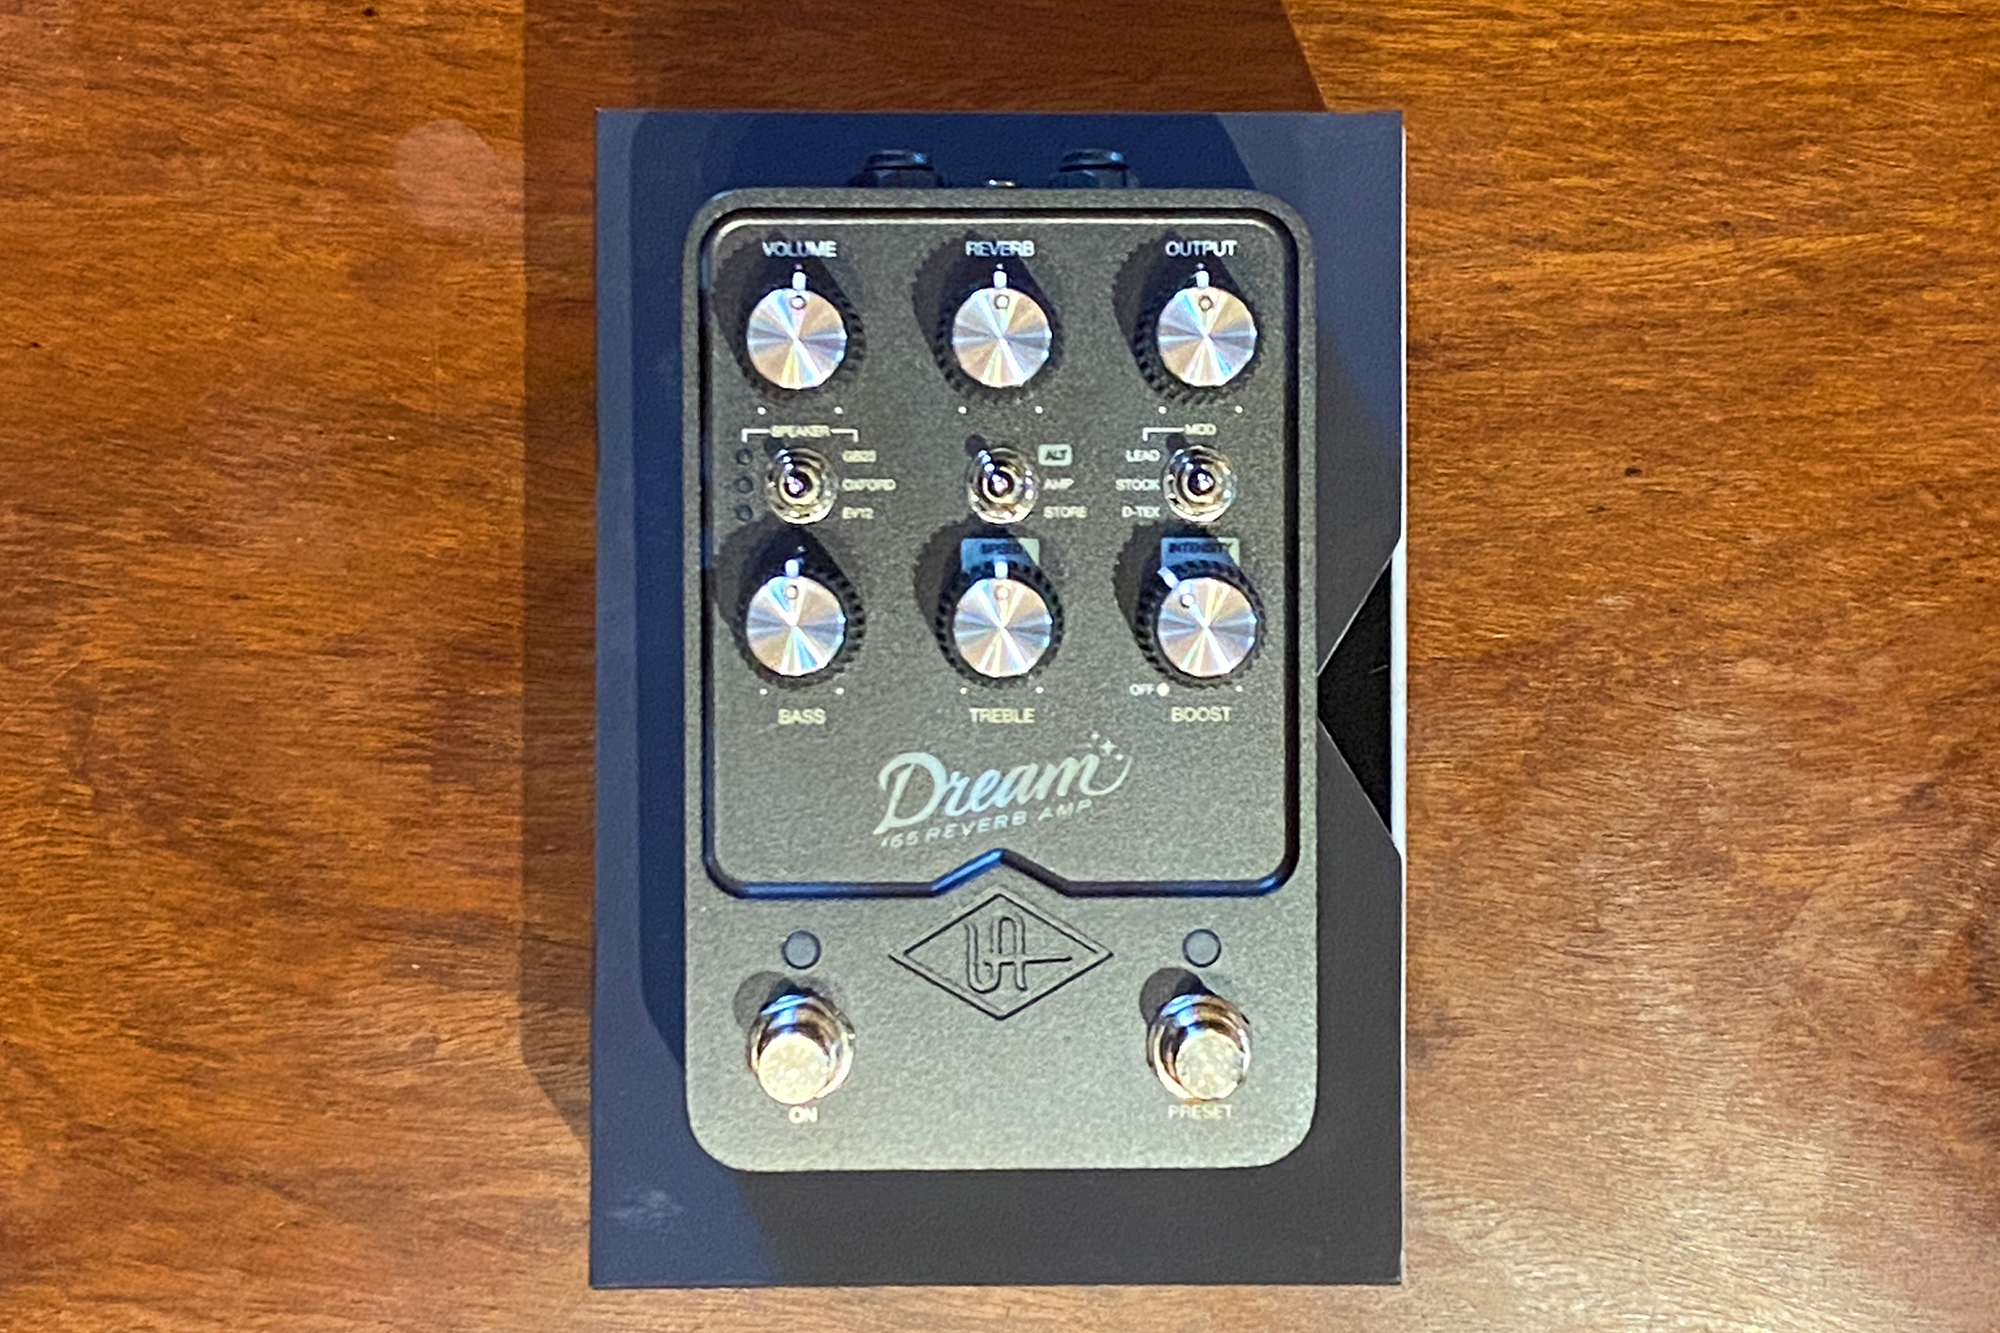 UAFX Dream guitar pedal sitting on top of its box